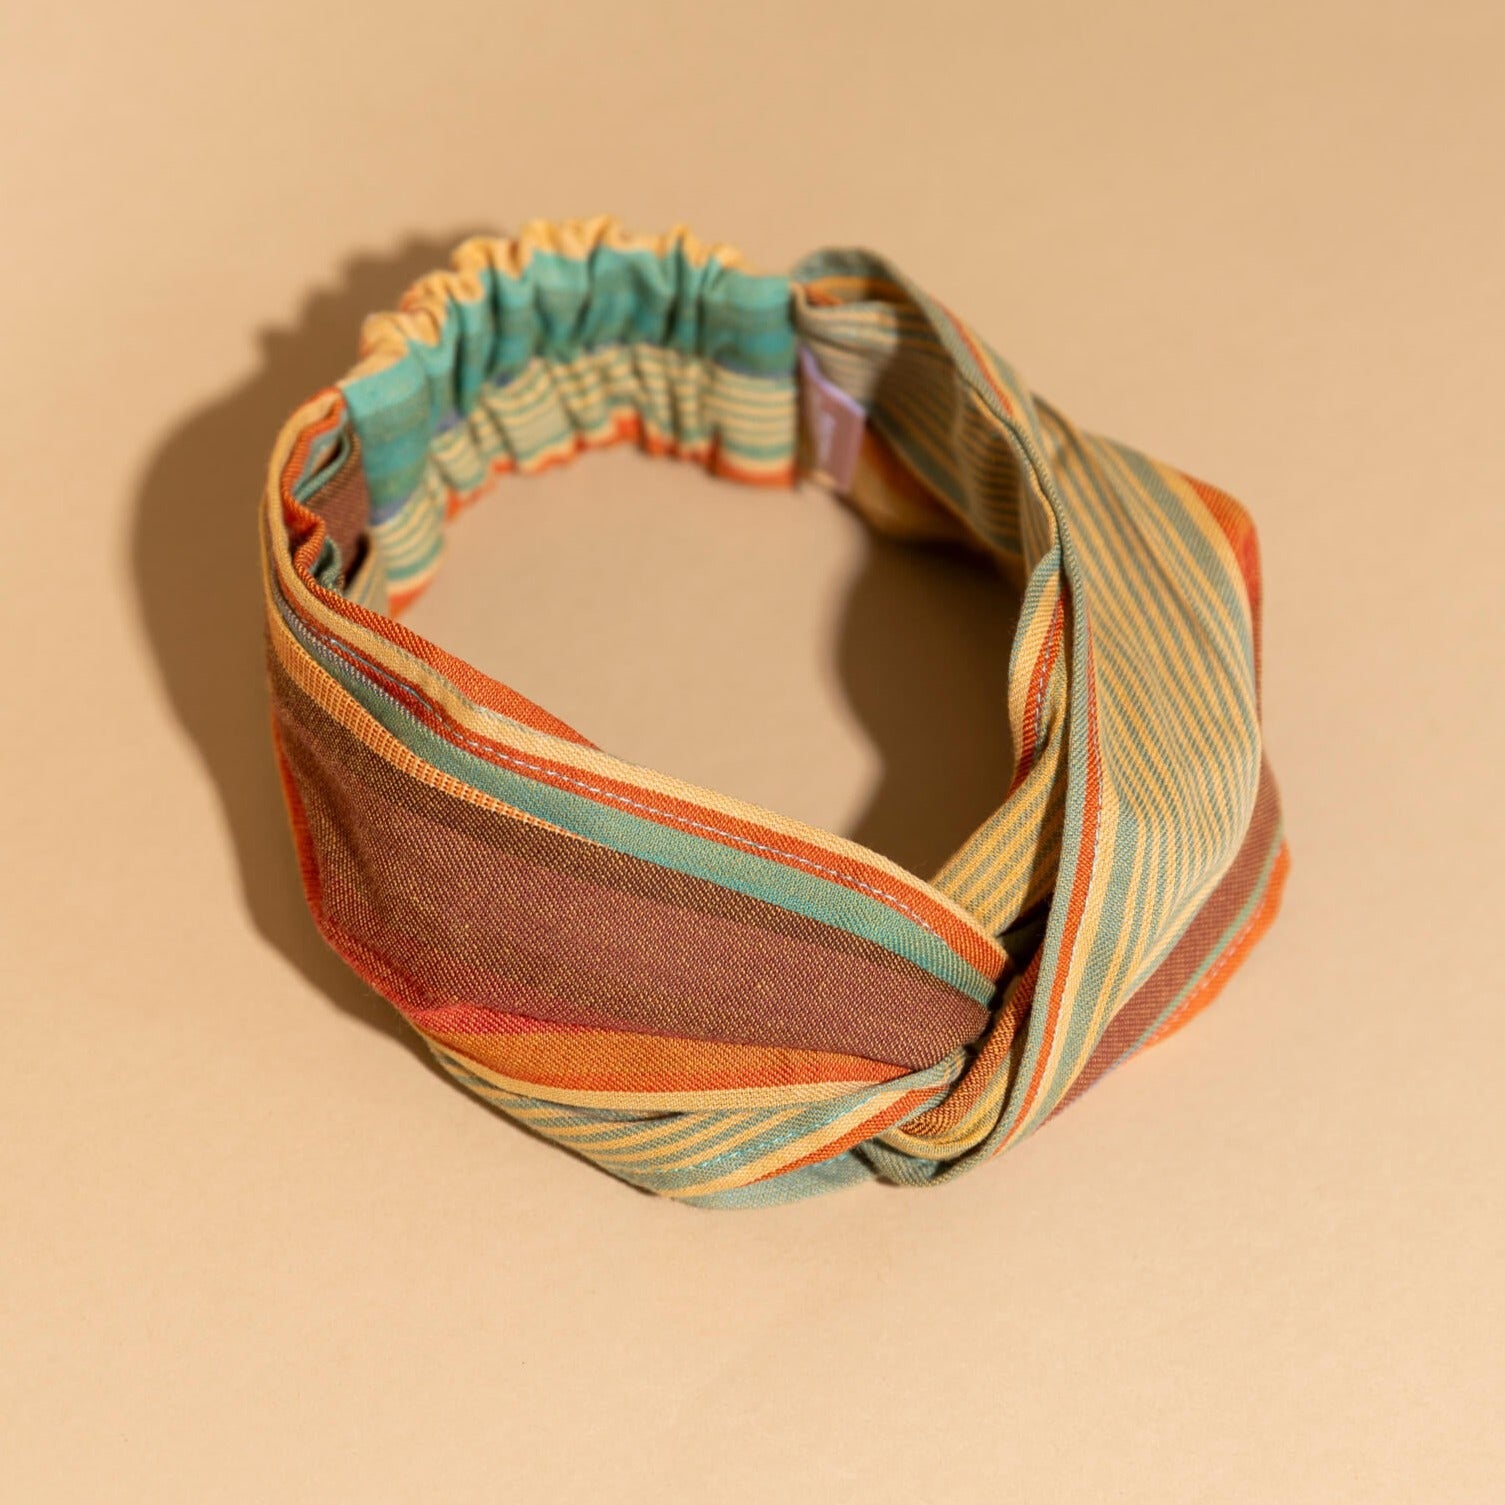 Can't Elope Yellow & Teal Stripes Woven Cotton Headband